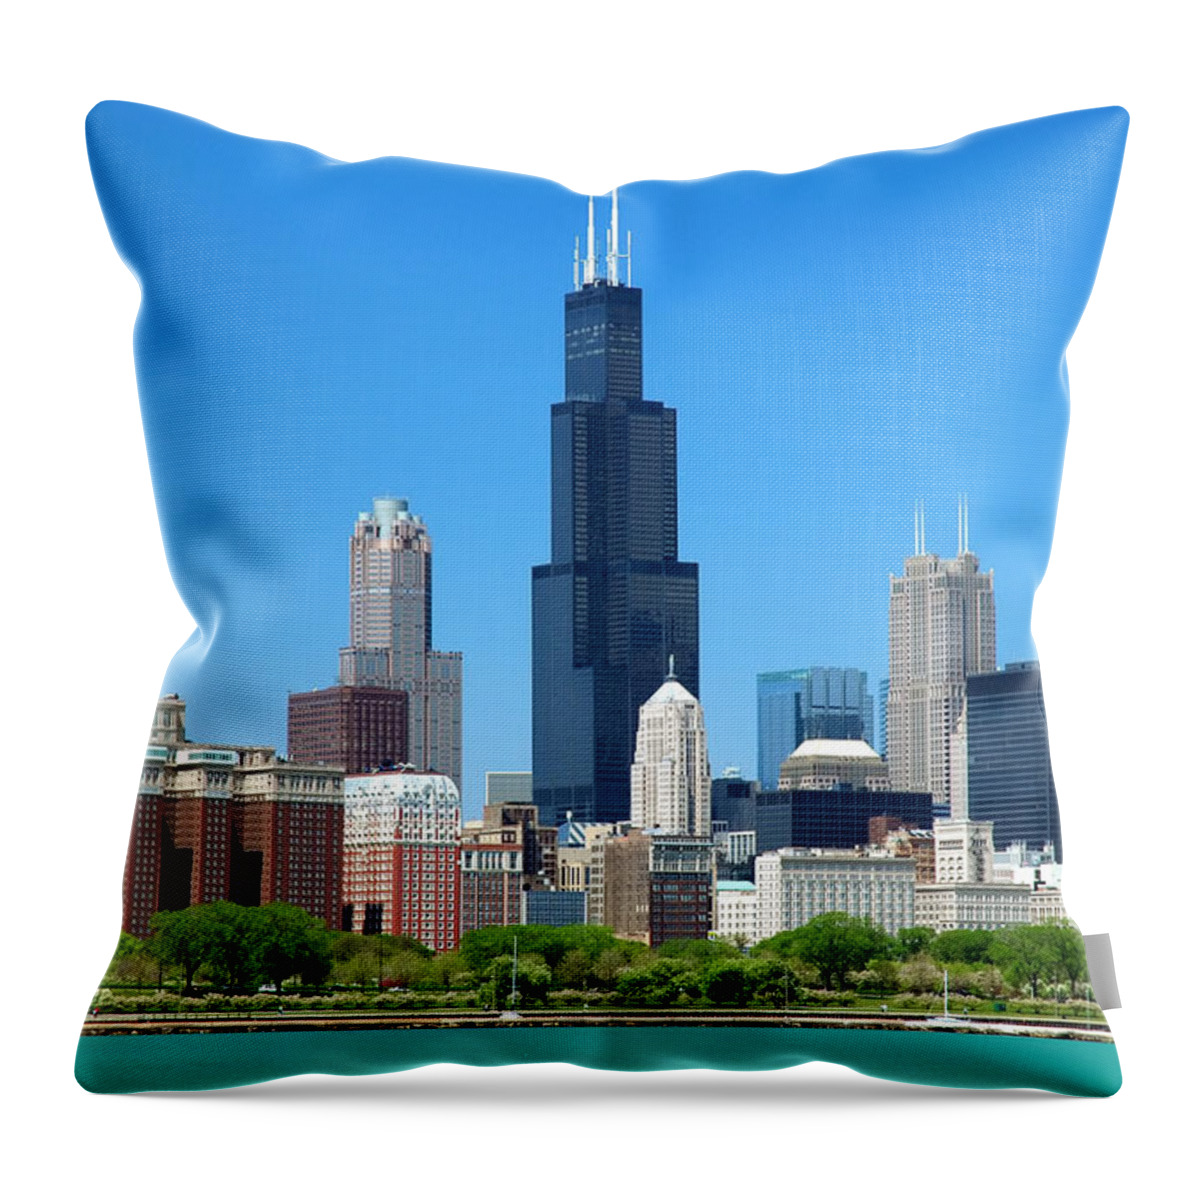 Lake Michigan Throw Pillow featuring the photograph Chicago Loop Skyline by Davel5957